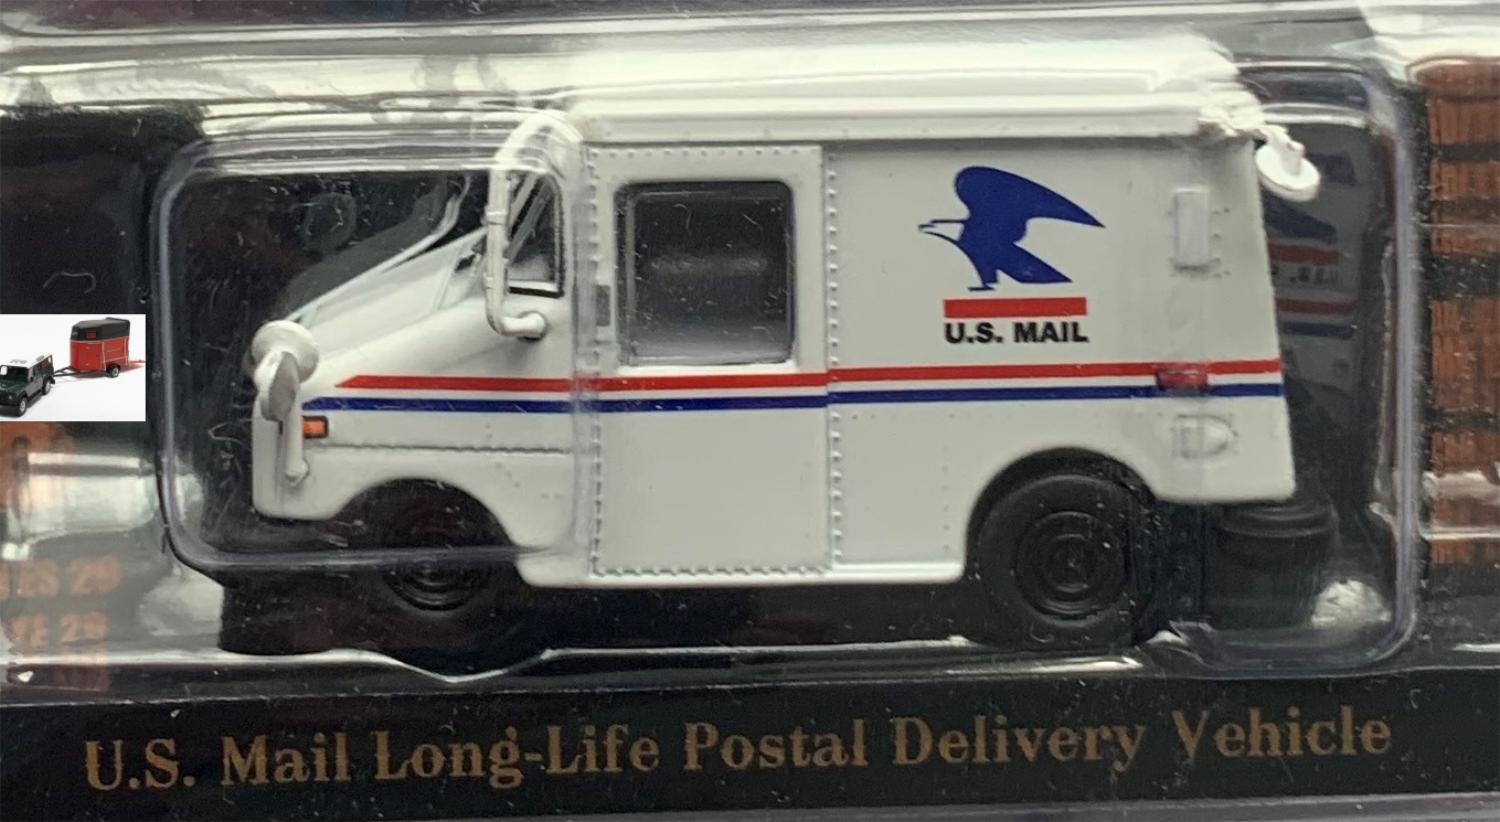 From the TV series Cheers, US Mail Life Postal Delivery Vehicle in white 1:64 scale model from Greenlight  Hollywood, Series 29, limited edition model